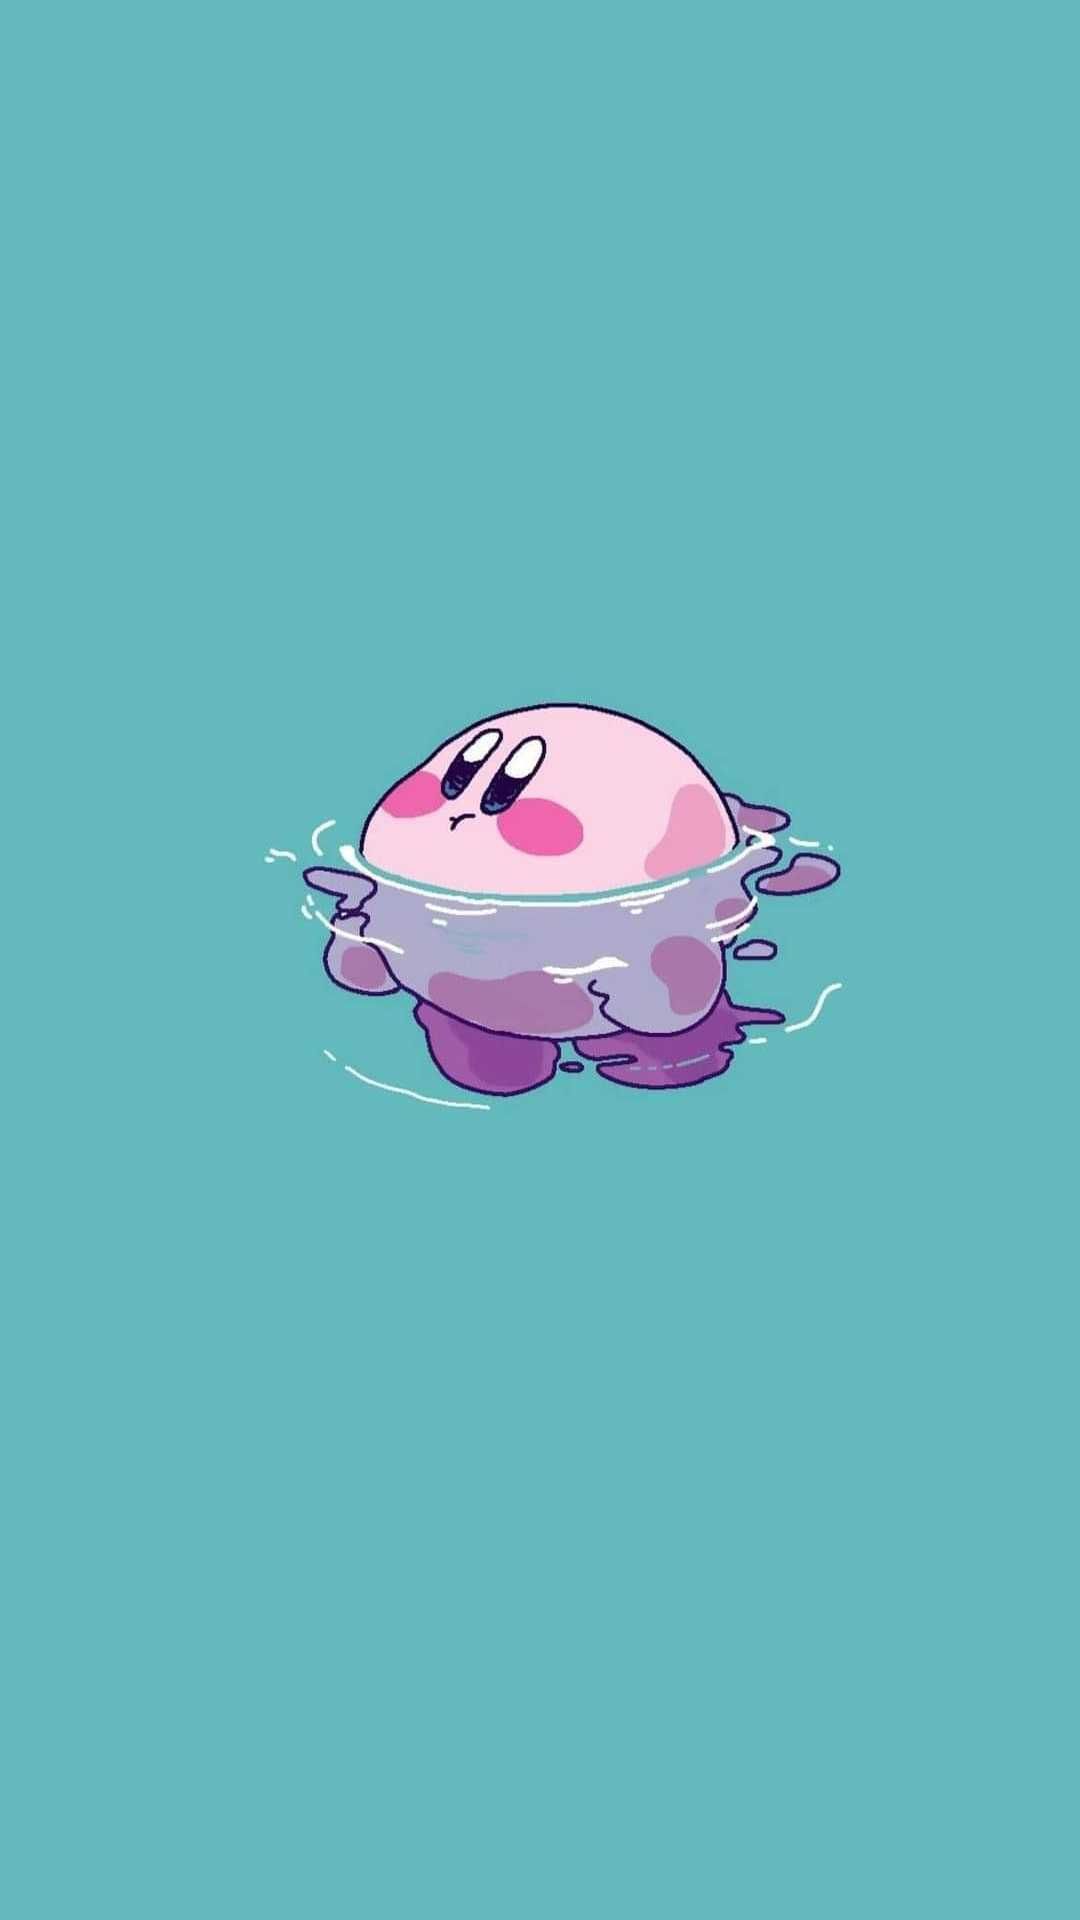 Download Free Kirby Wallpaper. Discover more Game, Kirby, Video Game wallpaper. Wallpaper iphone cute, Cute cartoon wallpaper, Kawaii wallpaper